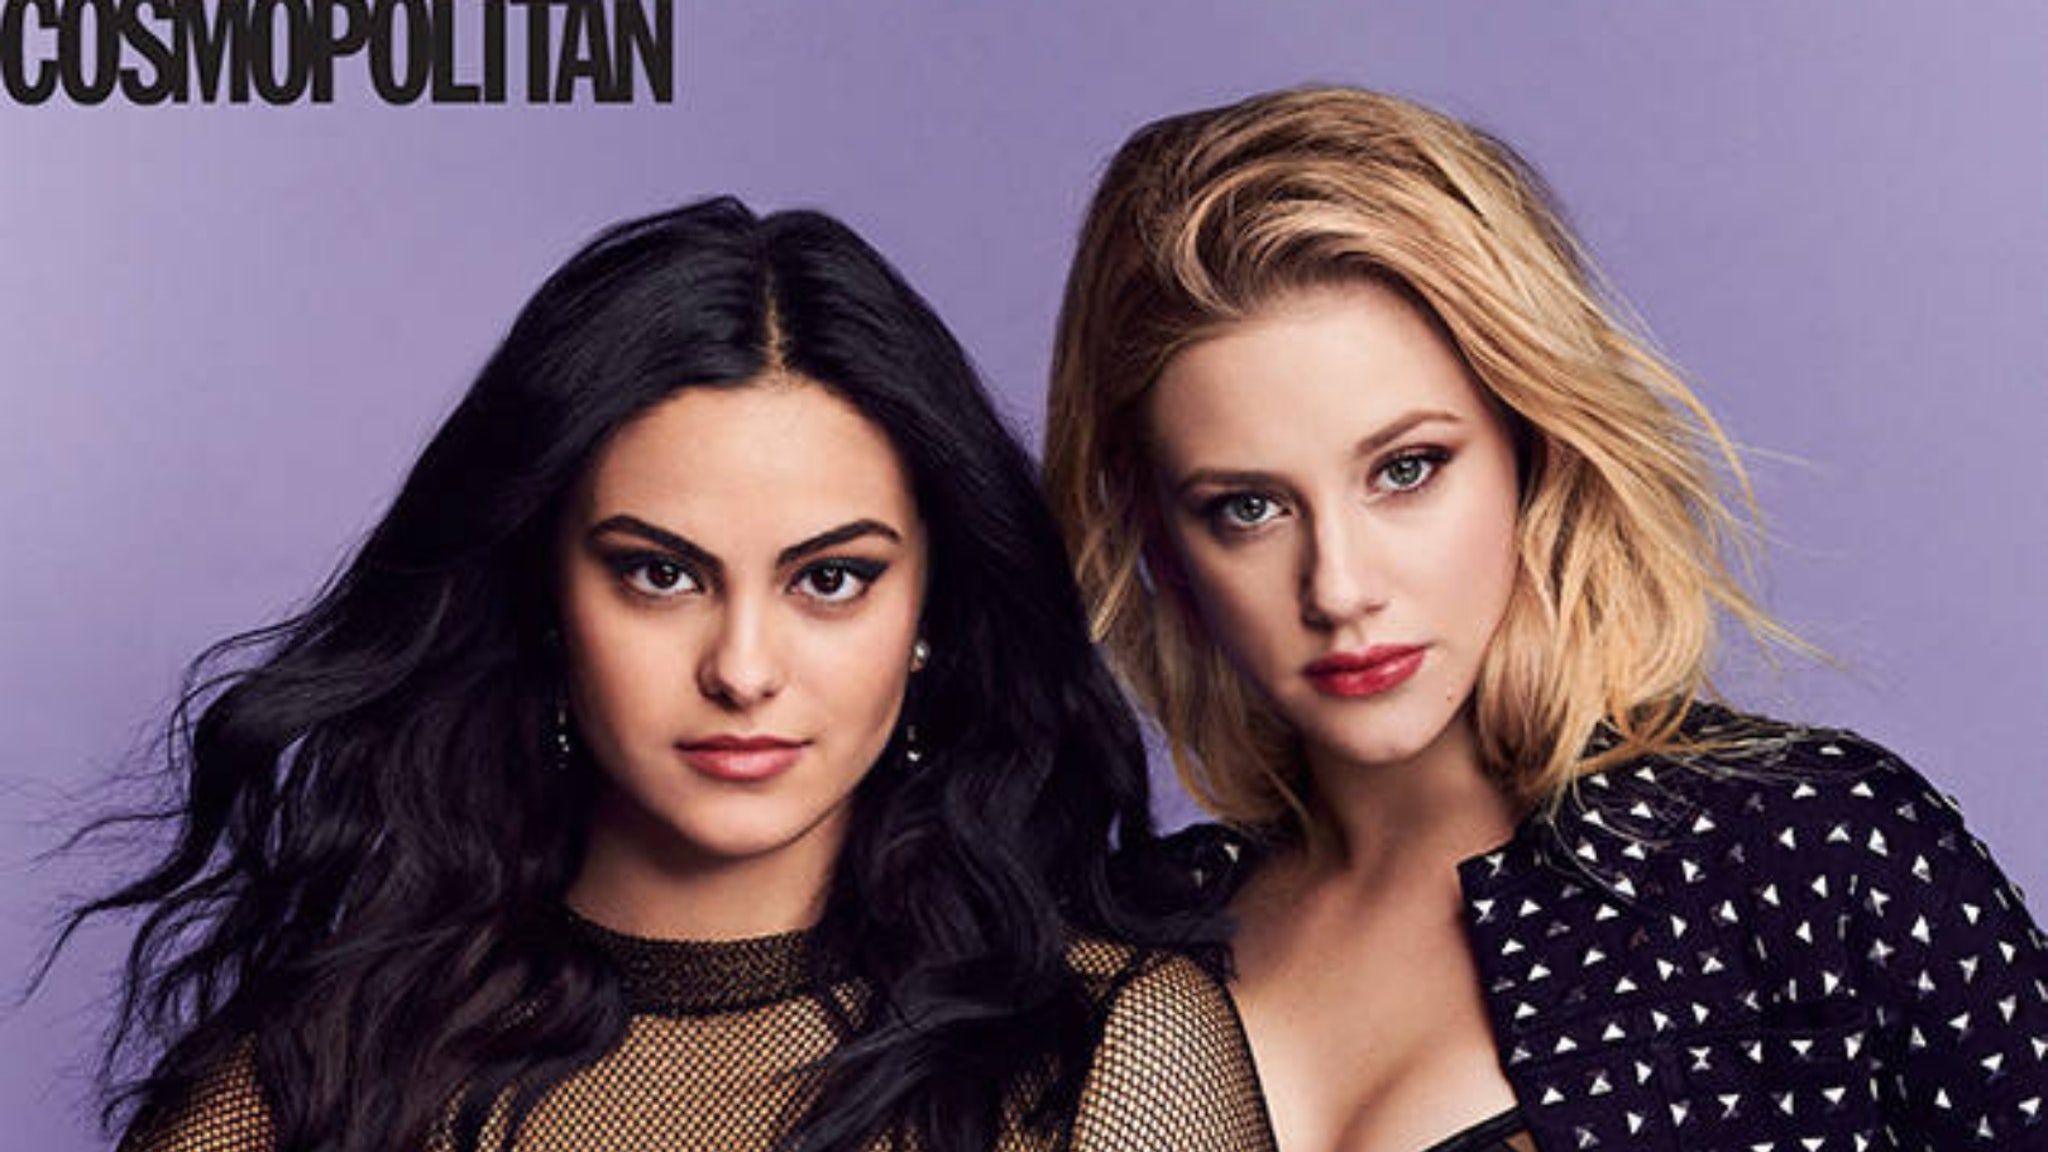 Riverdale Stars Lili Reinhart And Camila Mendes Share Sex Tips